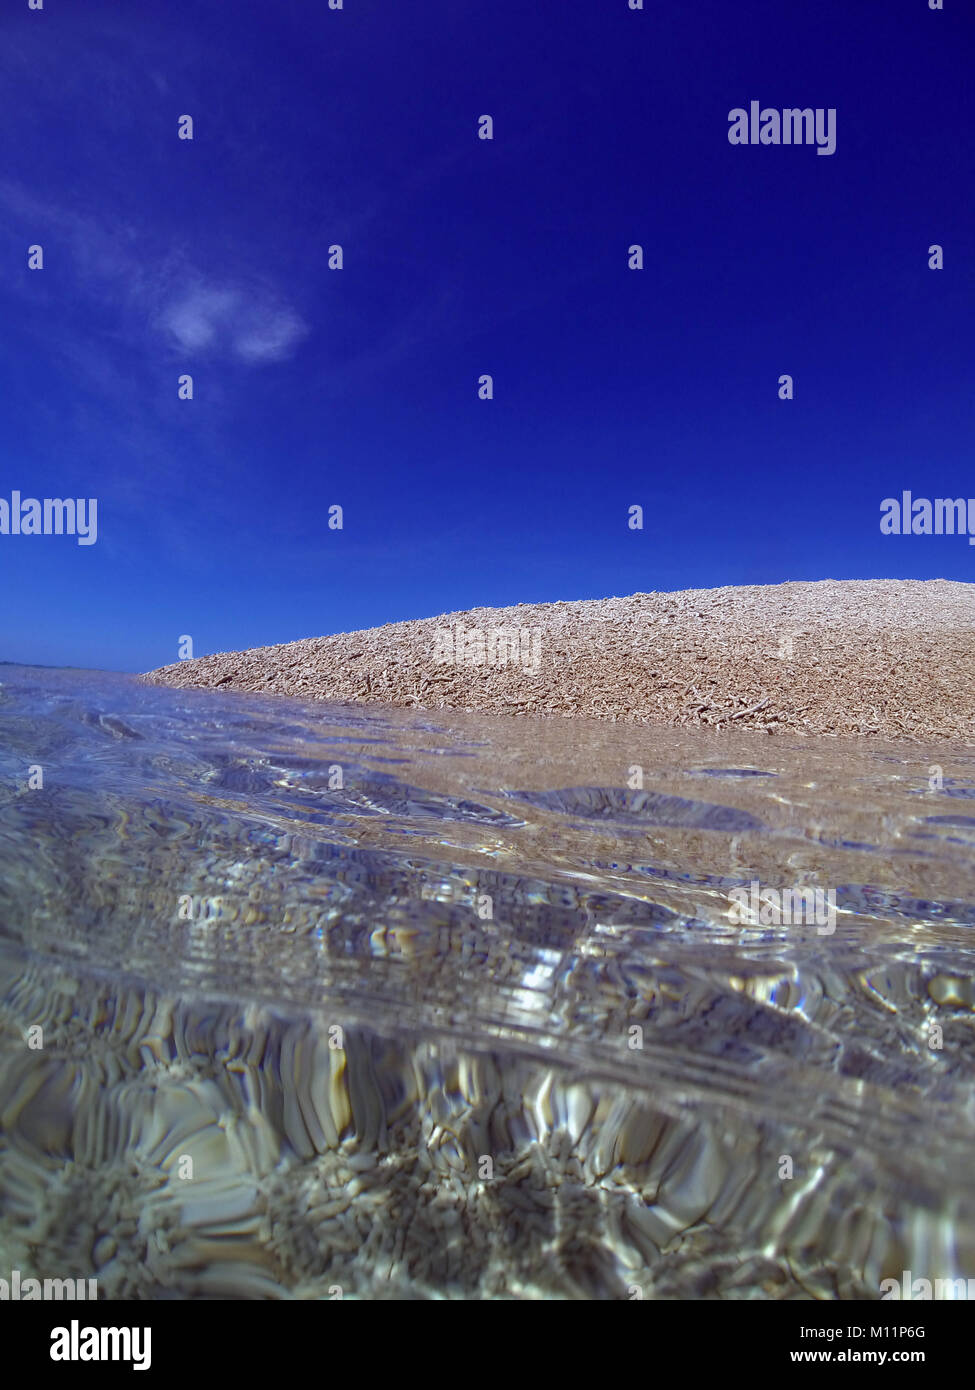 Coral rubble bank and clear water, Kent Island, Barnard Islands National Park, Great Barrier Reef, Queensland, Australia Stock Photo